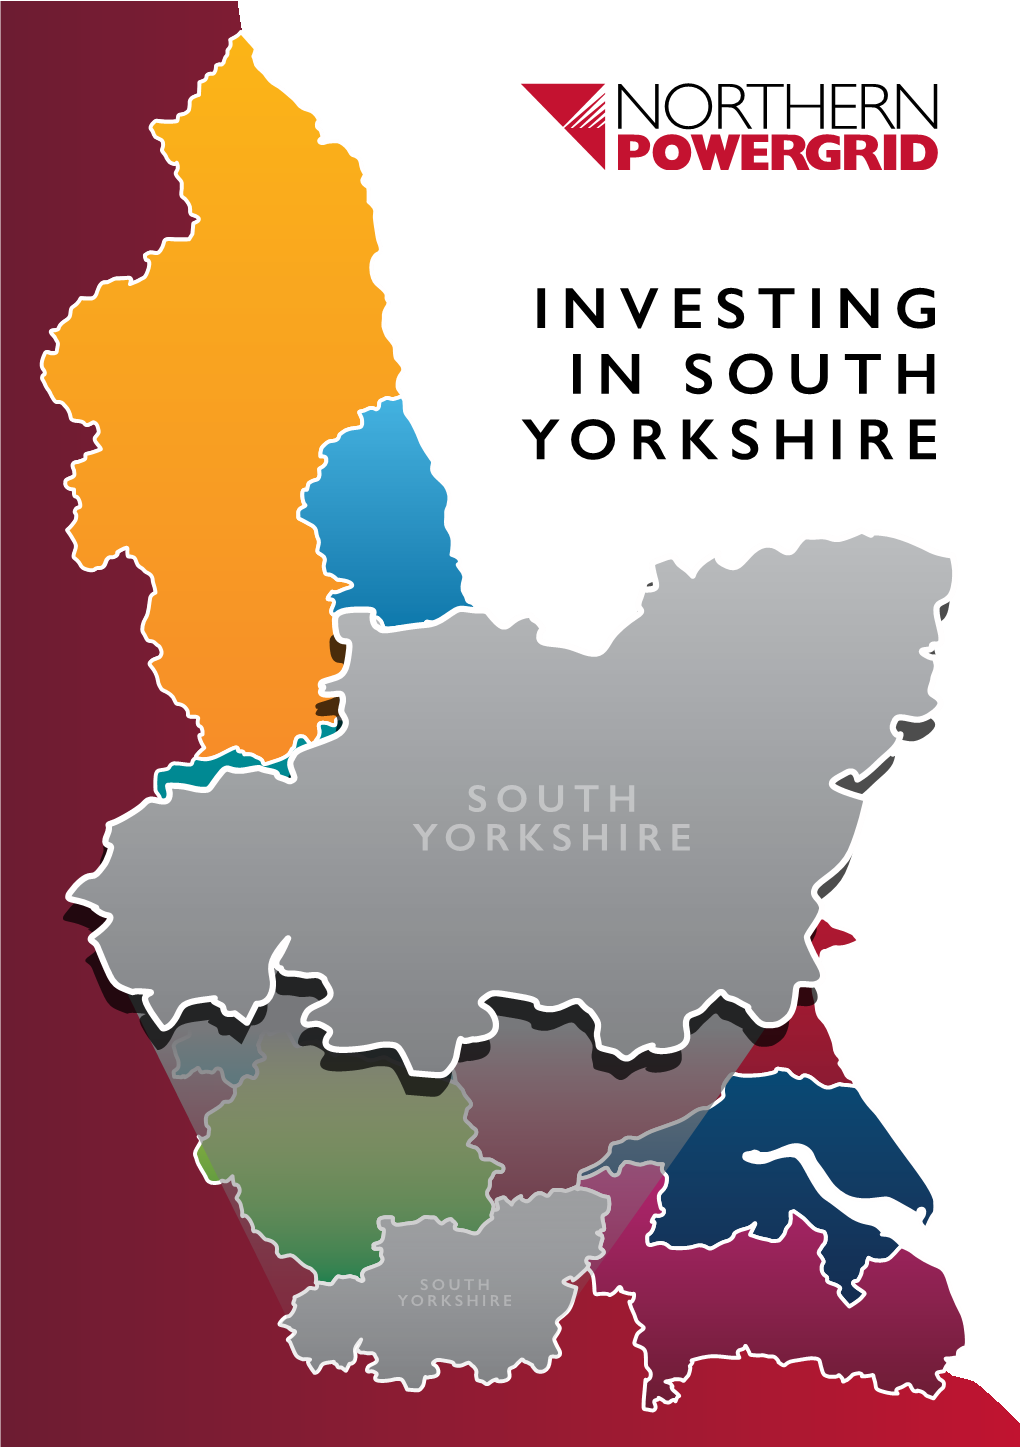 Investing in South Yorkshire Introducing Northern Powergrid